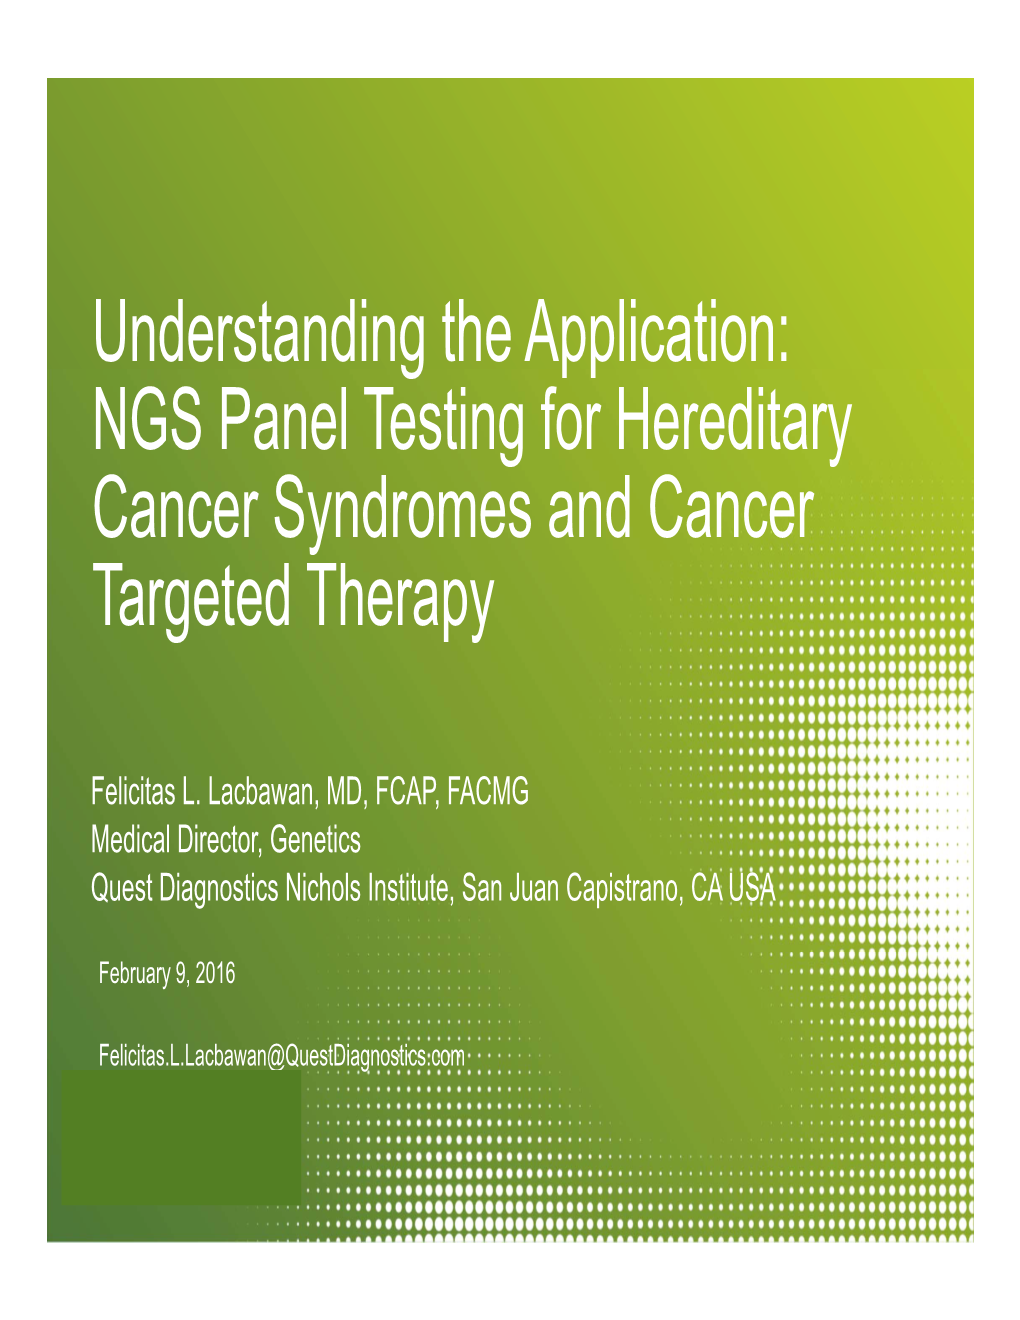 Understanding the Application: NGS Panel Testing for Hereditary Cancer Syndromes and Cancer Targeted Therapy